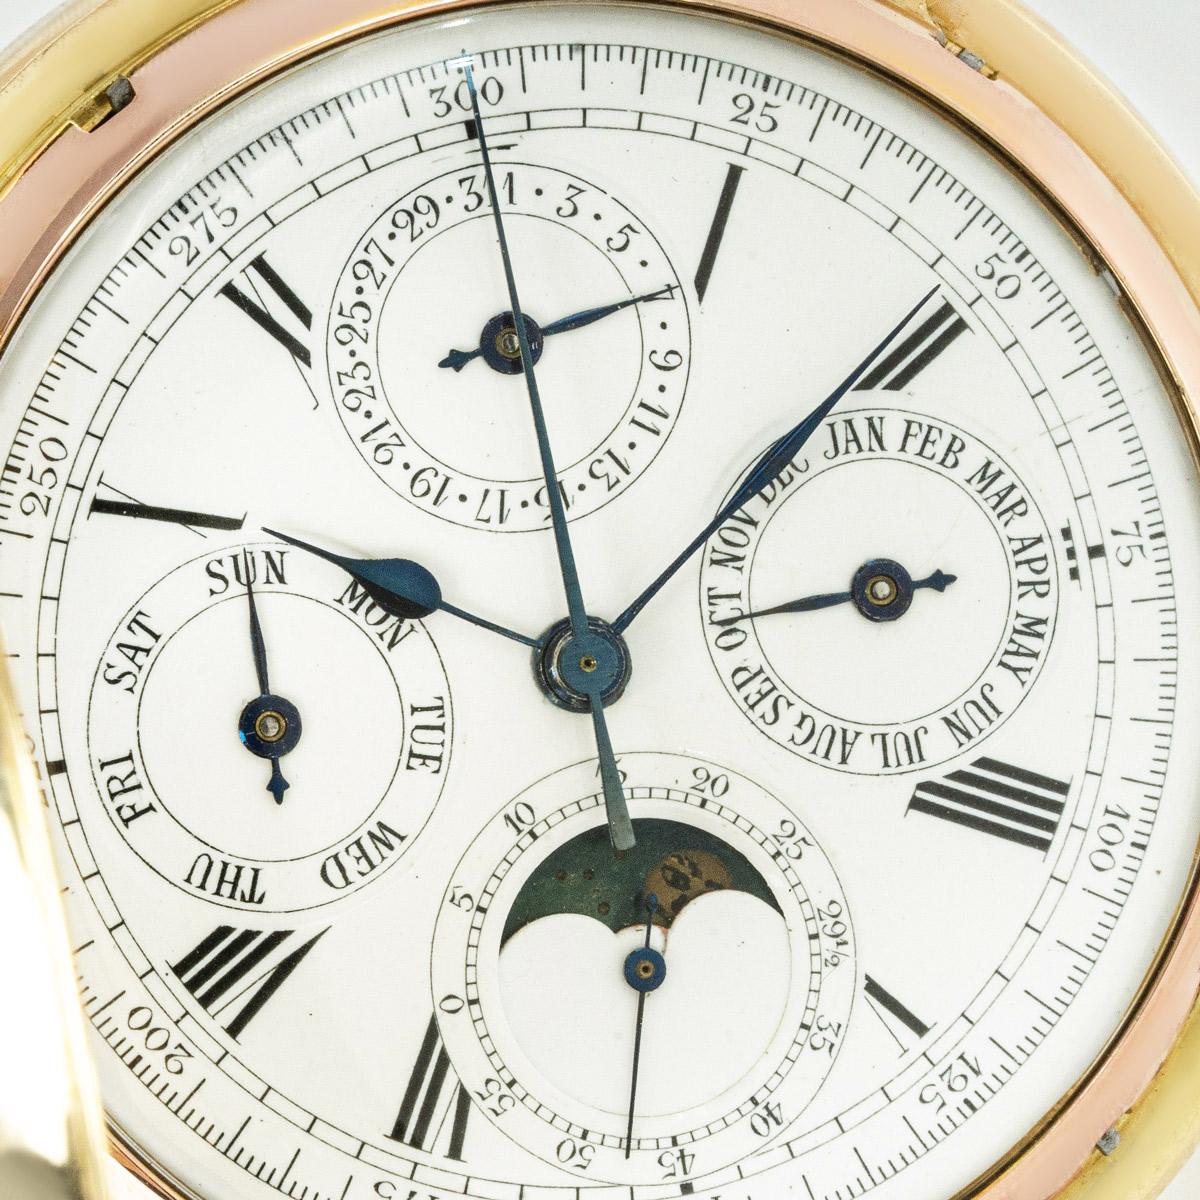 An 18k Yellow Gold Half Hunter Chronograph Calendar Minute Repeater Keyless Lever Pocket Watch

Dial: A white enamel dial with roman numerals and outer minute railtrack, with day and month subdial at 3 & 9 o'clock, moon phase, small seconds subdial.